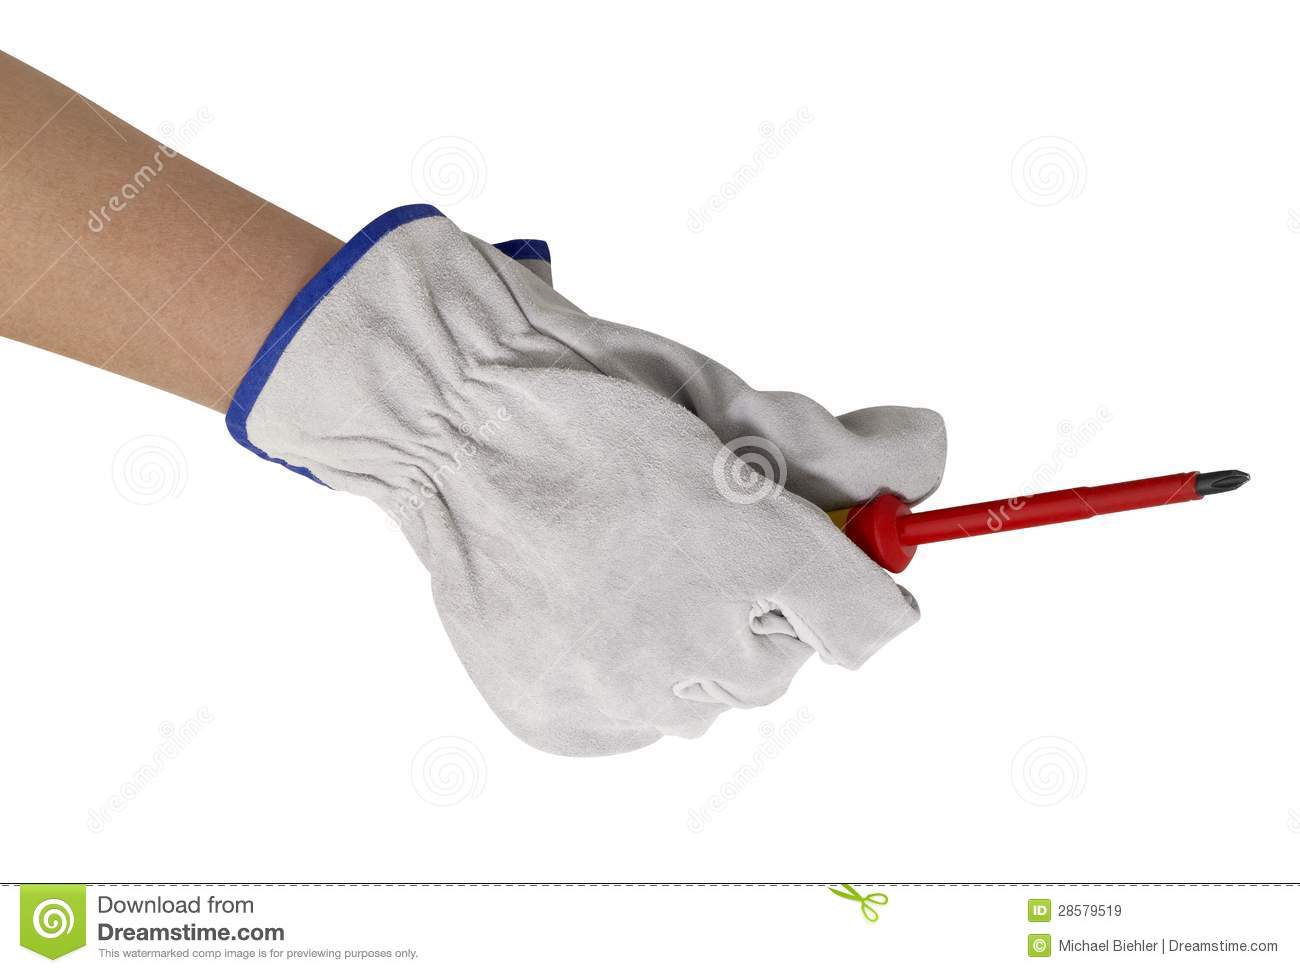 Hand Gloved With A Light Grey Working Glove Holding A Screwdriver